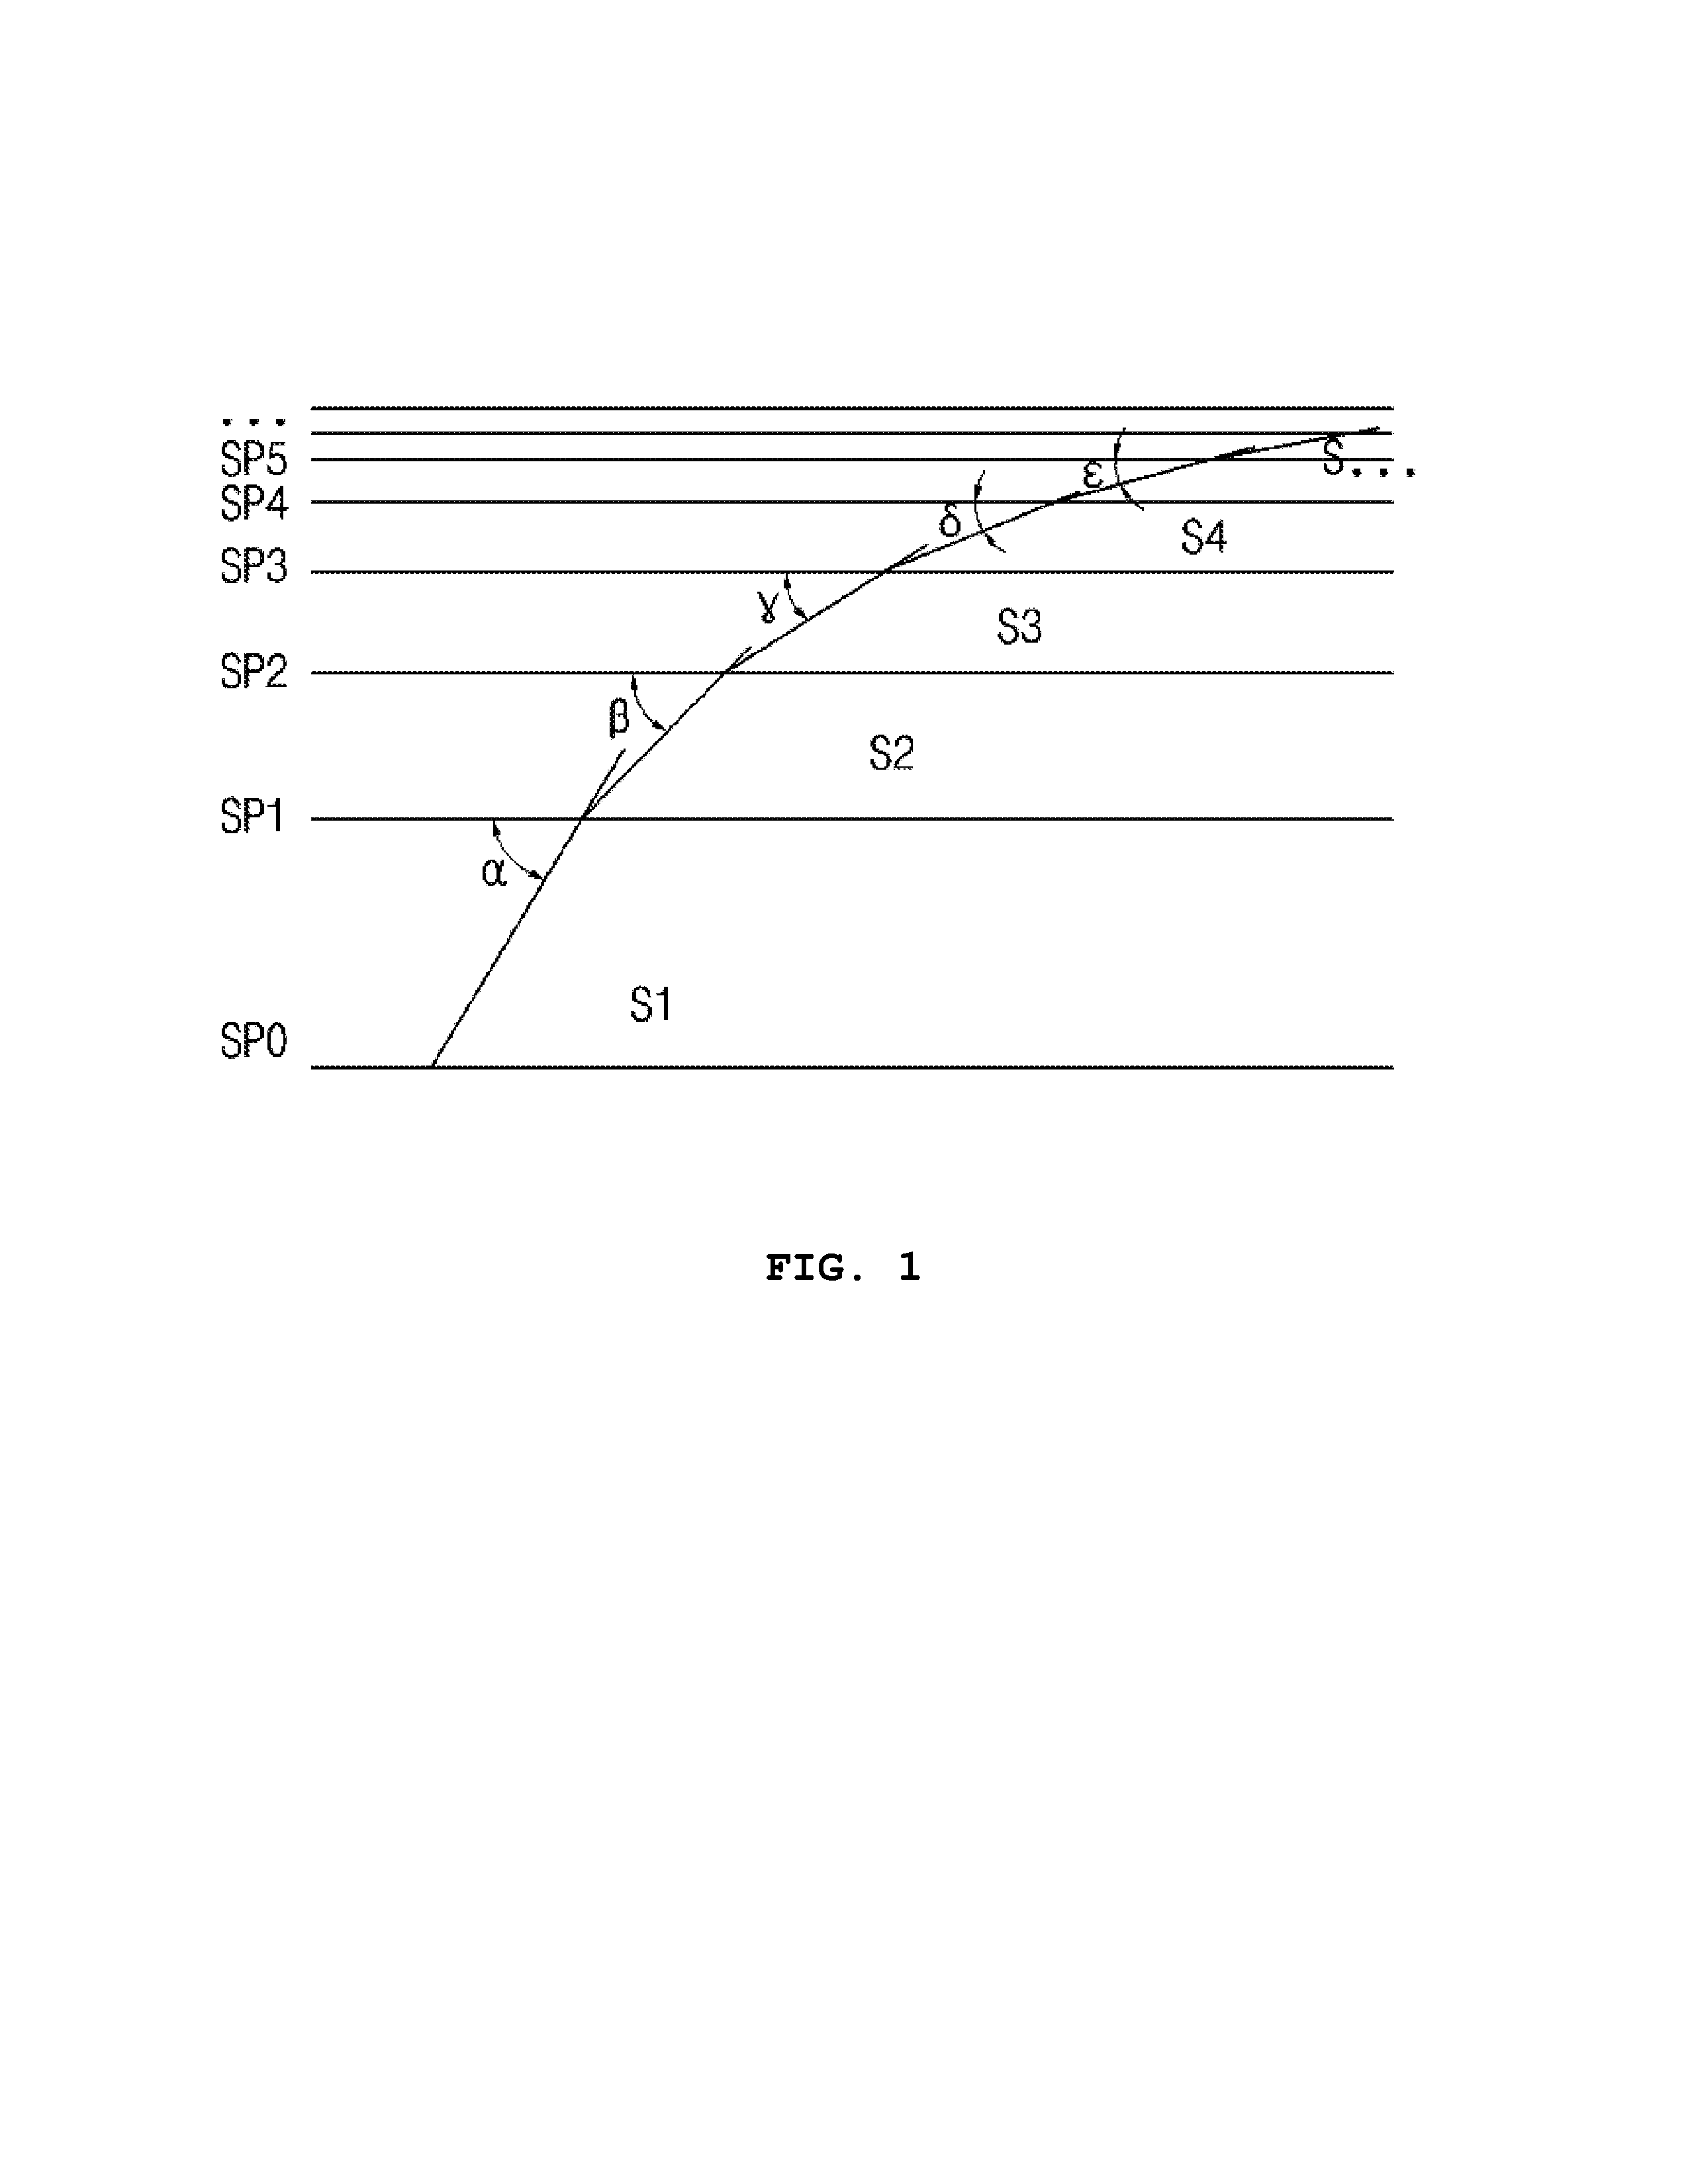 Multistage control method of flow control valve using DC motor